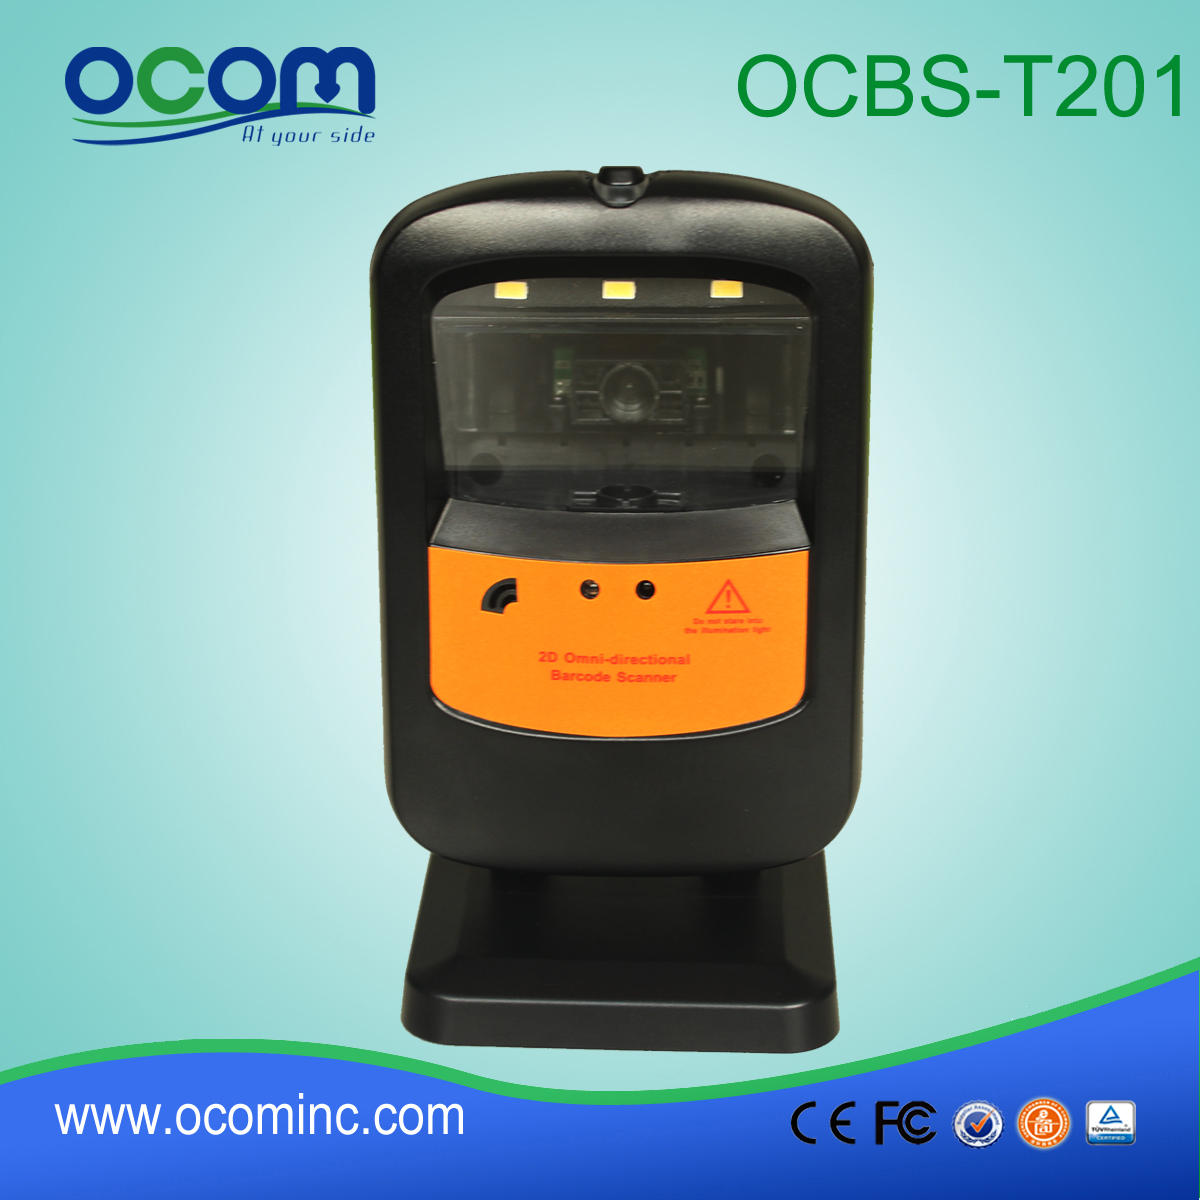 table top barcode scanner / leitor (OCBs-T201)